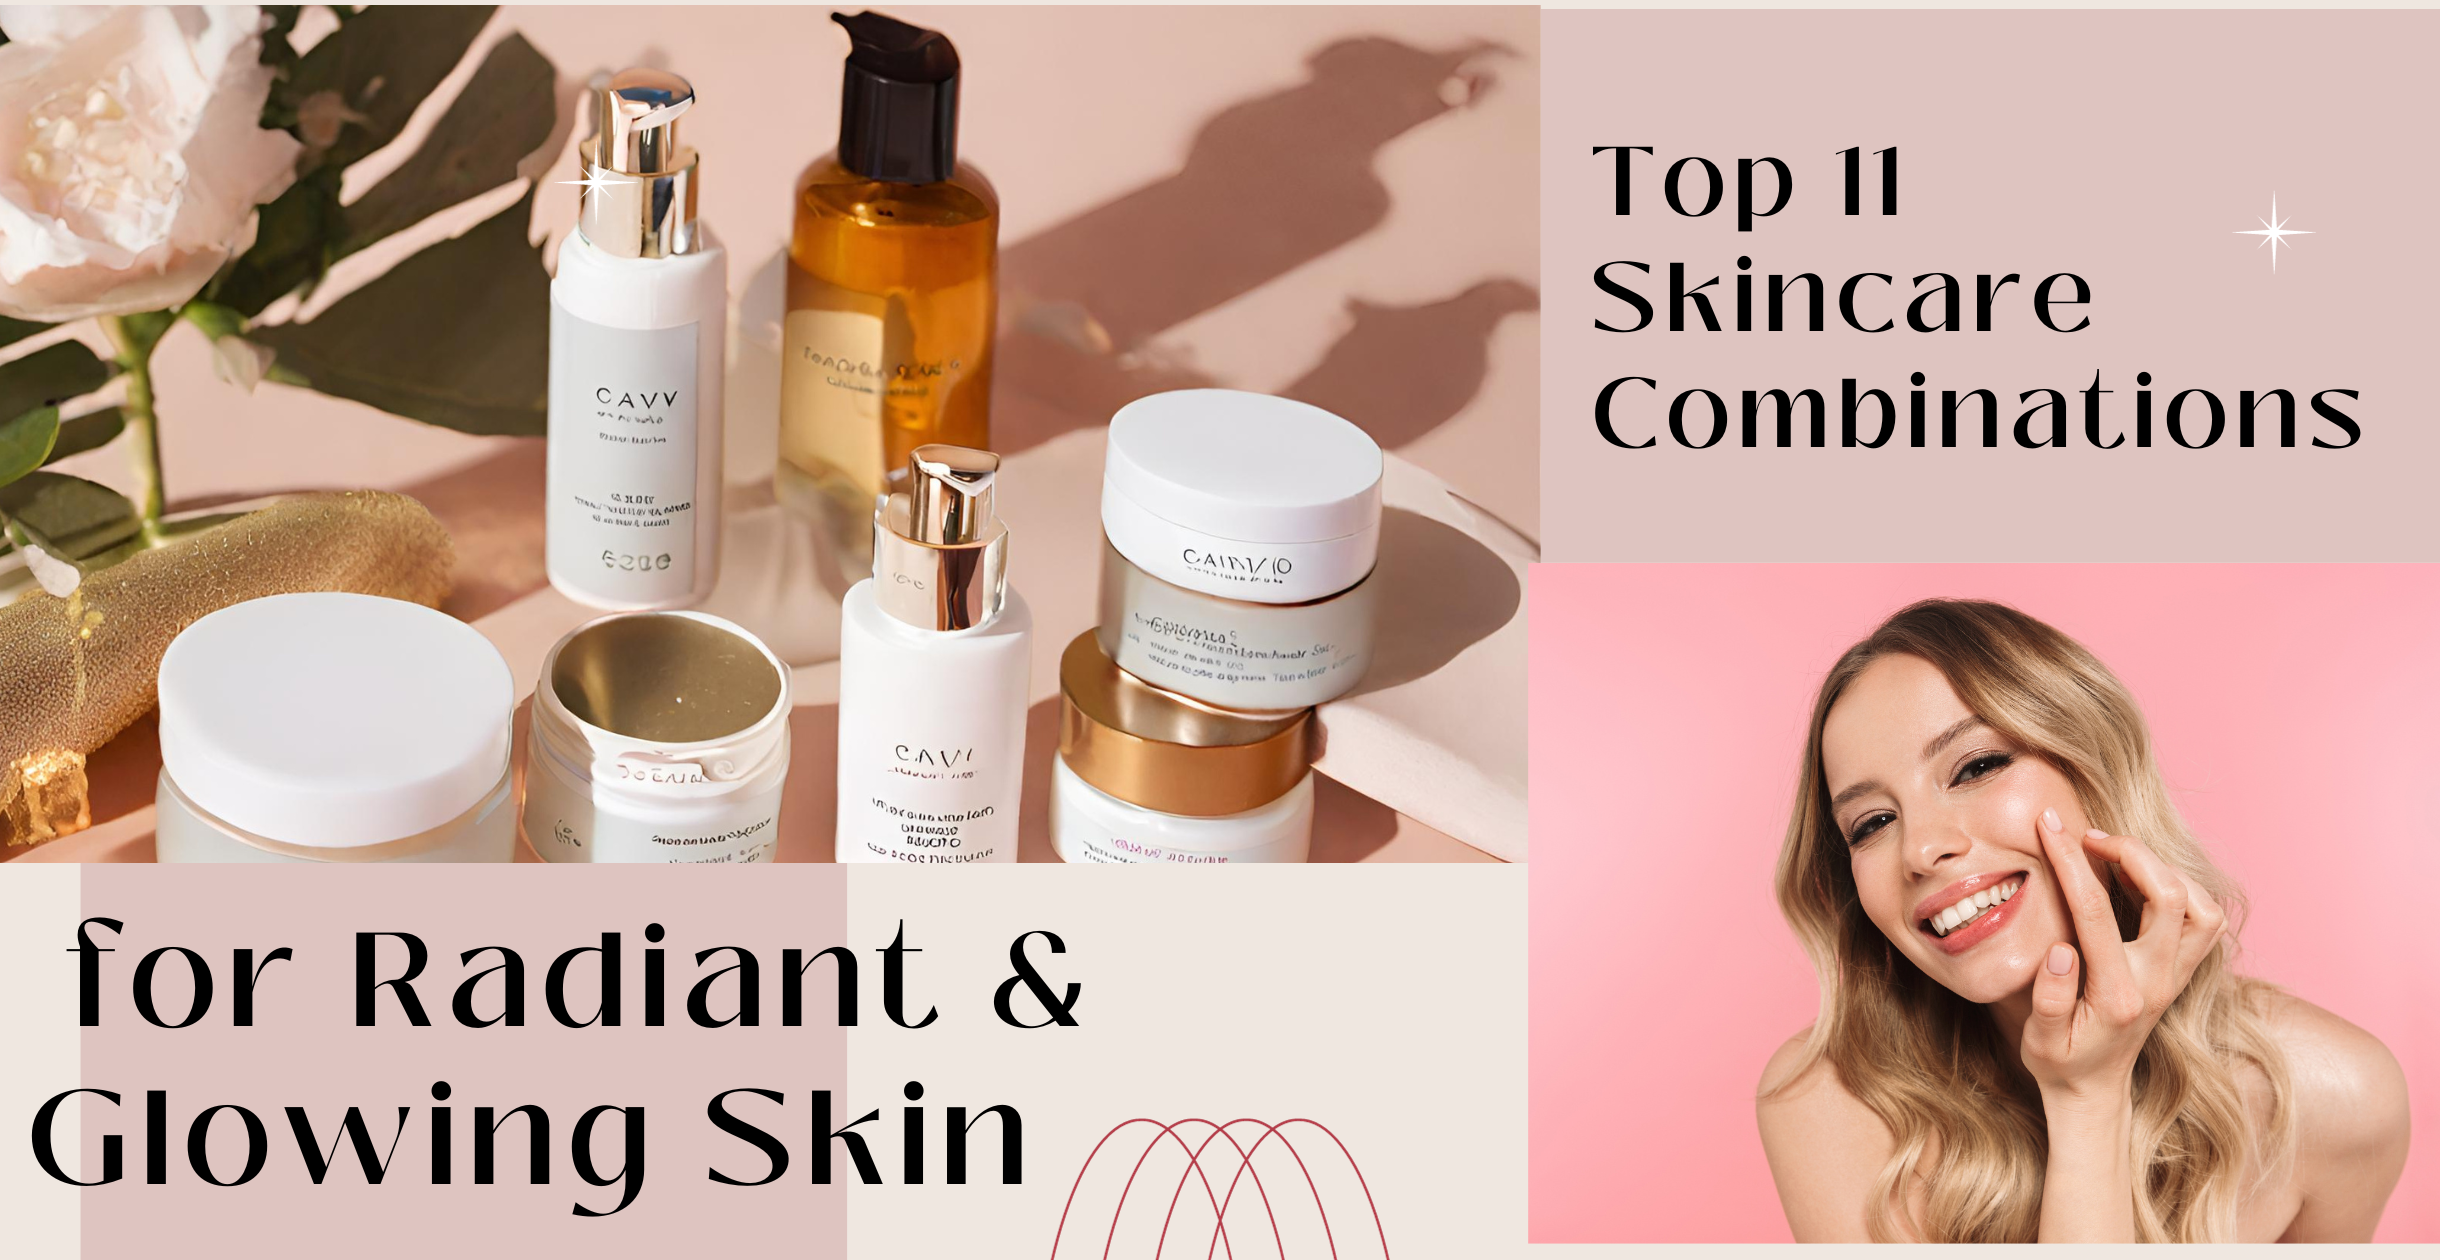 Top 11 Skincare Combinations for Radiant & Glowing Skin